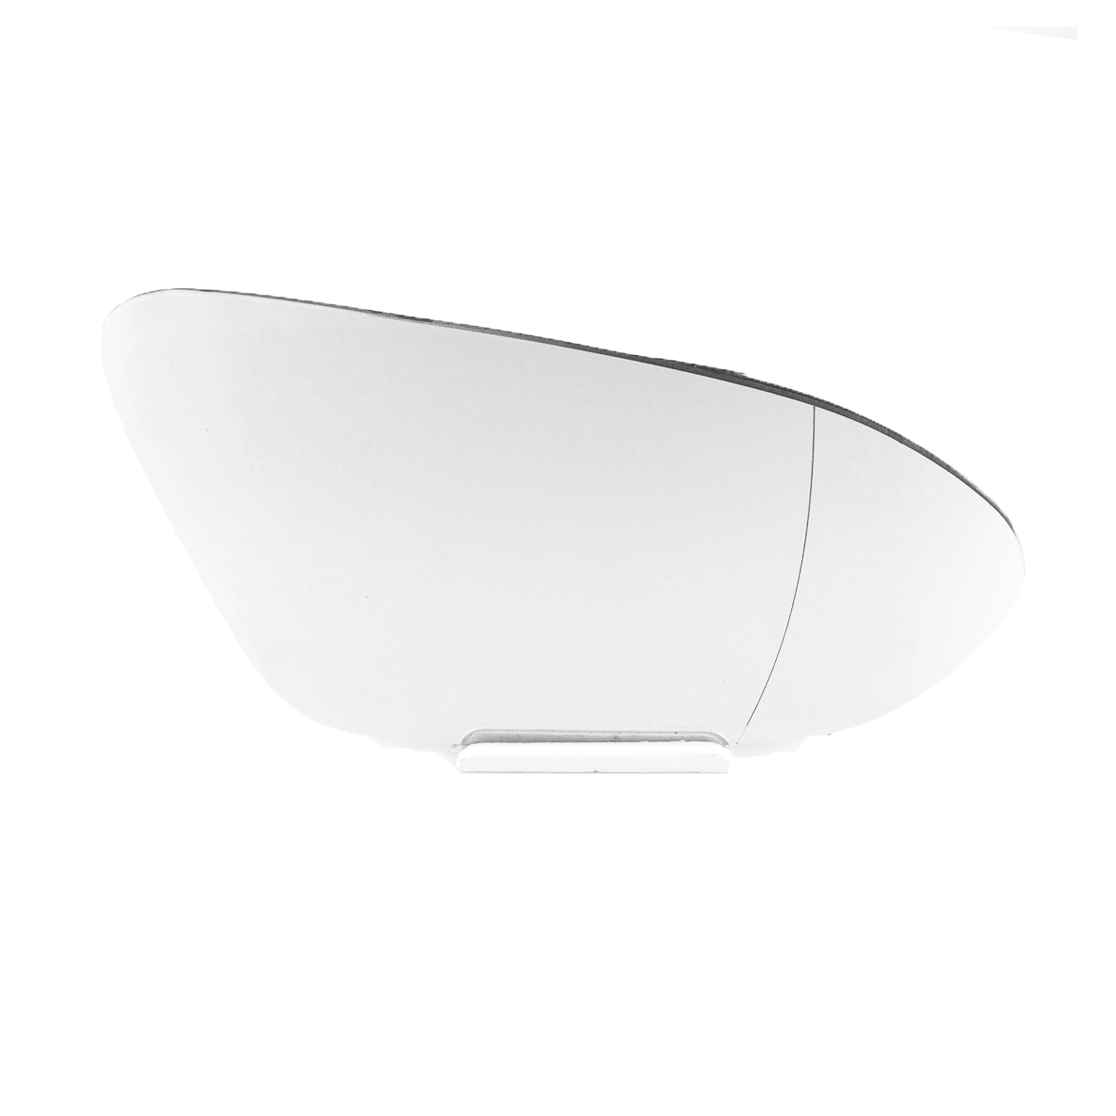 Vauxhall Insignia Wing Mirror Glass RIGHT HAND ( UK Driver Side ) 2017 to 2020 – Wide Angle Wing Mirror